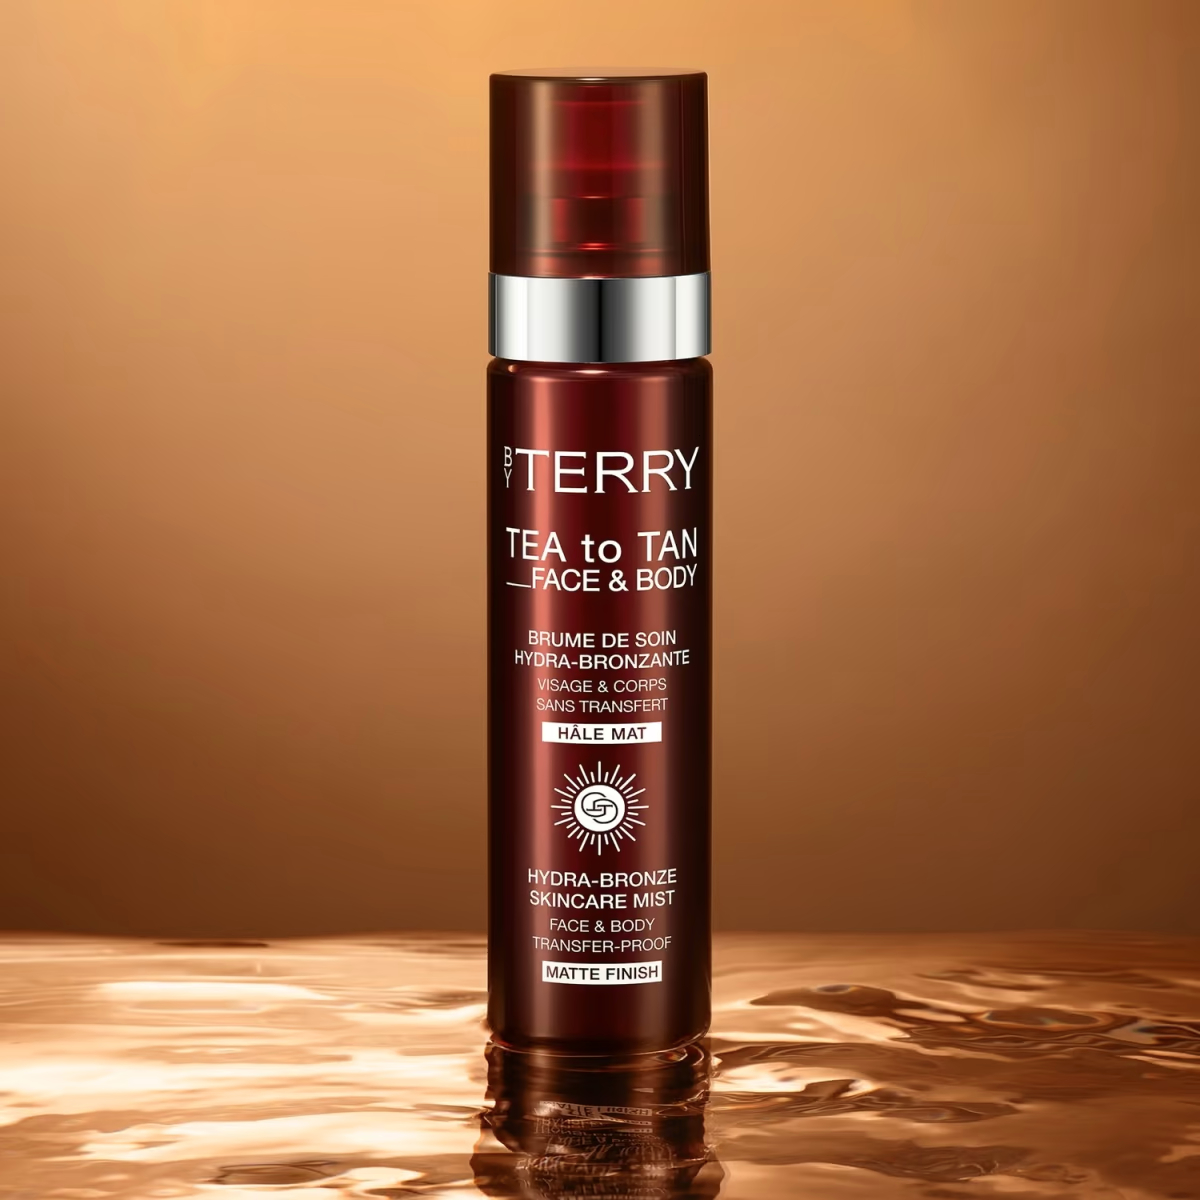 By Terry Tea To Tan Face & Body Matte Finish